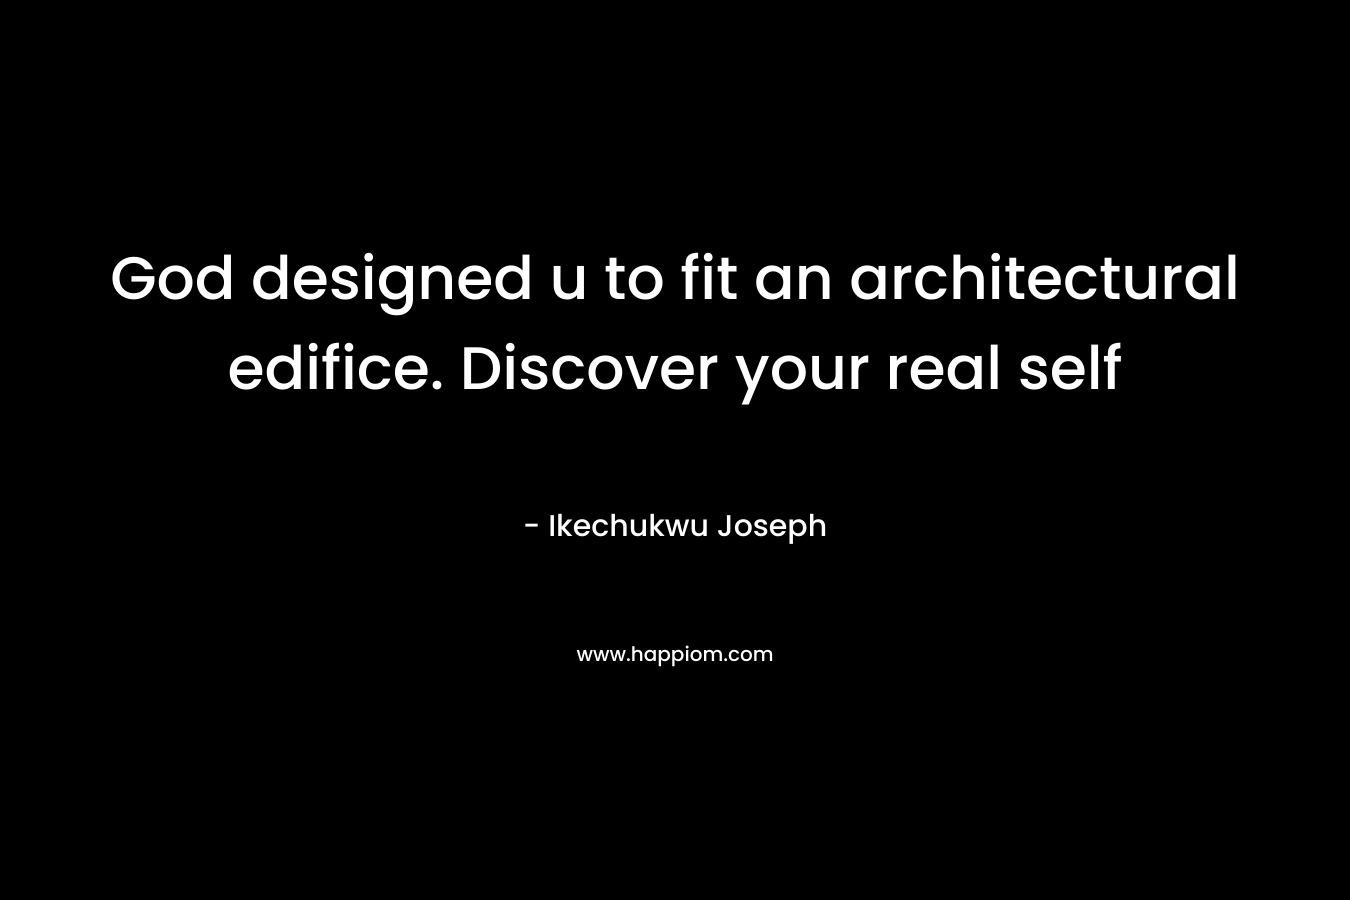 God designed u to fit an architectural edifice. Discover your real self – Ikechukwu Joseph